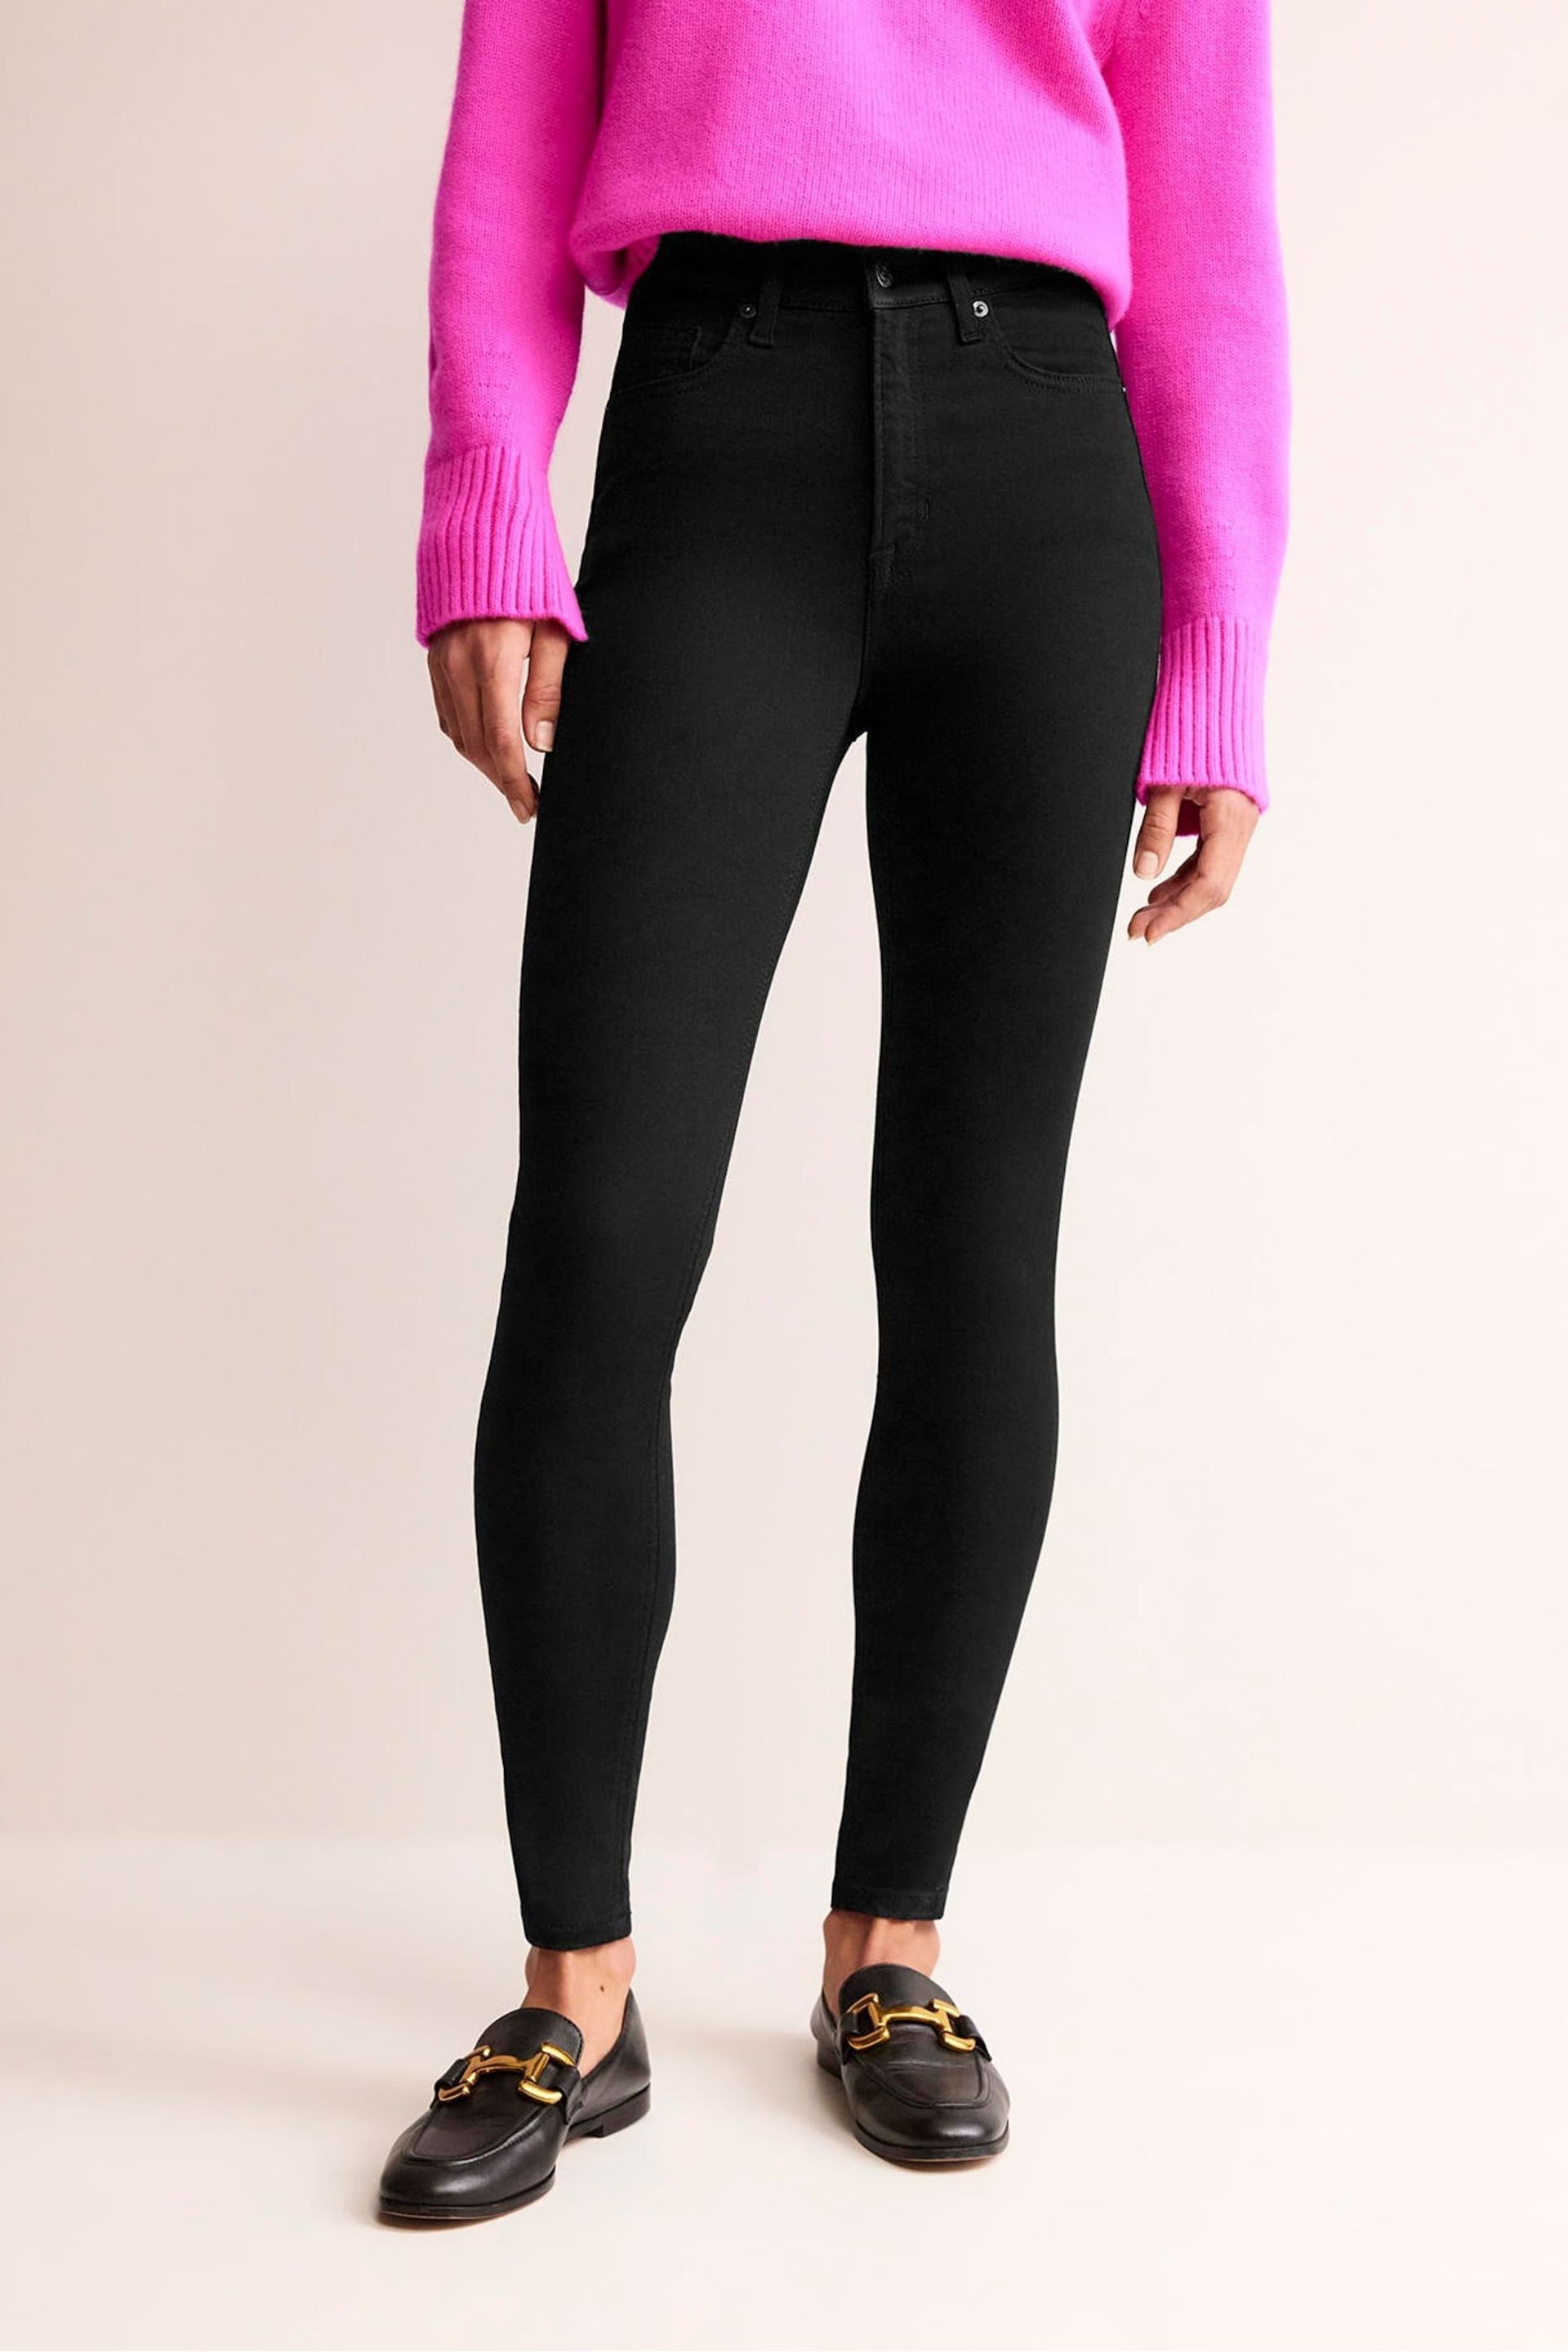 Boden Black High Rise Skinny Jeans - Image 1 of 6